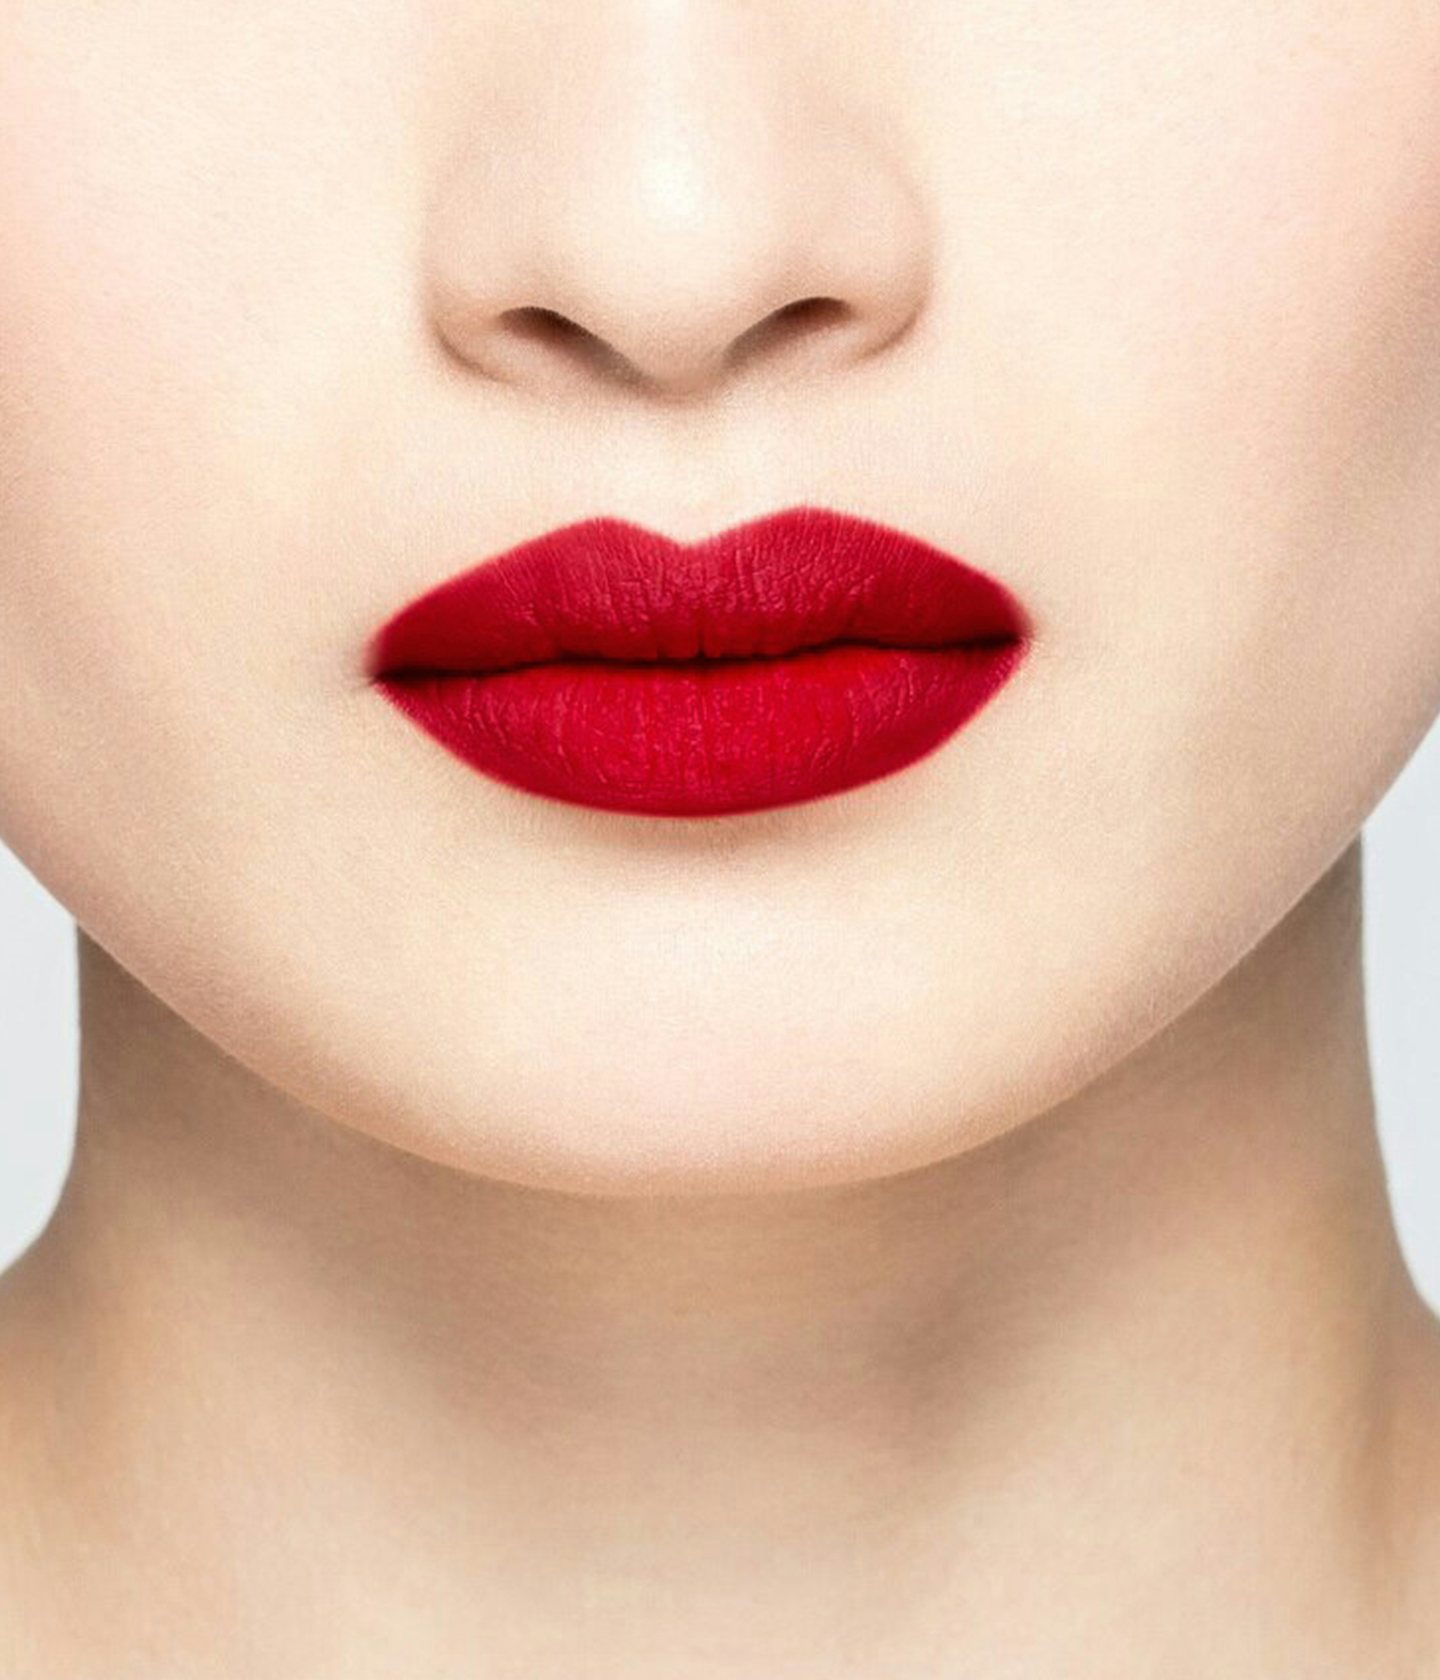 La bouche rouge Le Rouge Rosie lipstick shade on the lips of an Asian model